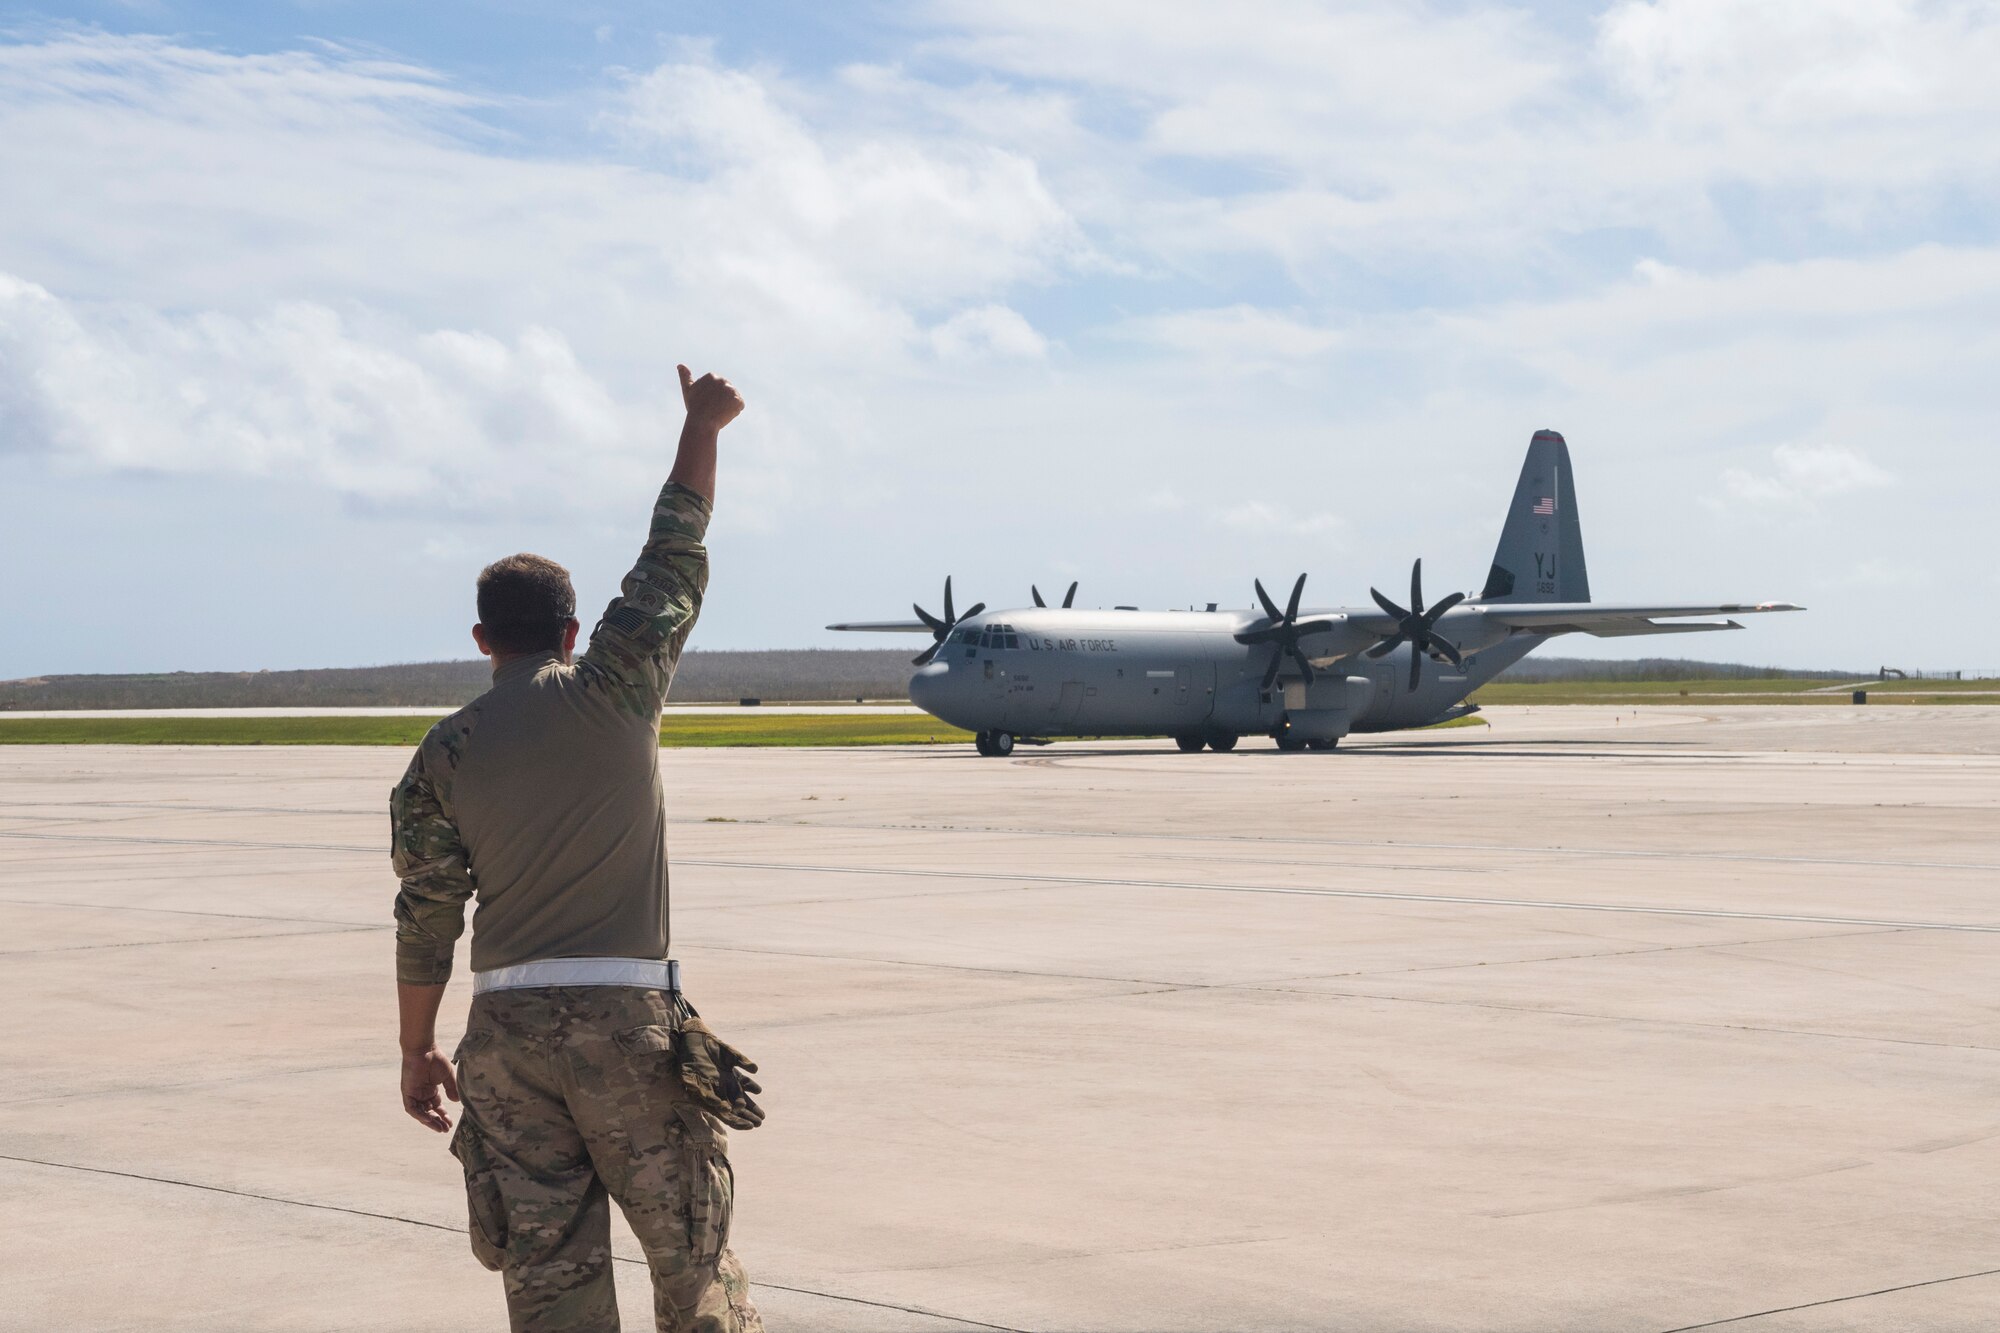 Service members from joint Region Marianas and U.S. Indo-Pacific Command are providing Department of Defense support to CNMI civil and local officials as part of the FEMA-supported Super Typhoon Yutu recovery efforts. (U.S. Air Force photo by Tech. Sgt. Christopher Ruano)